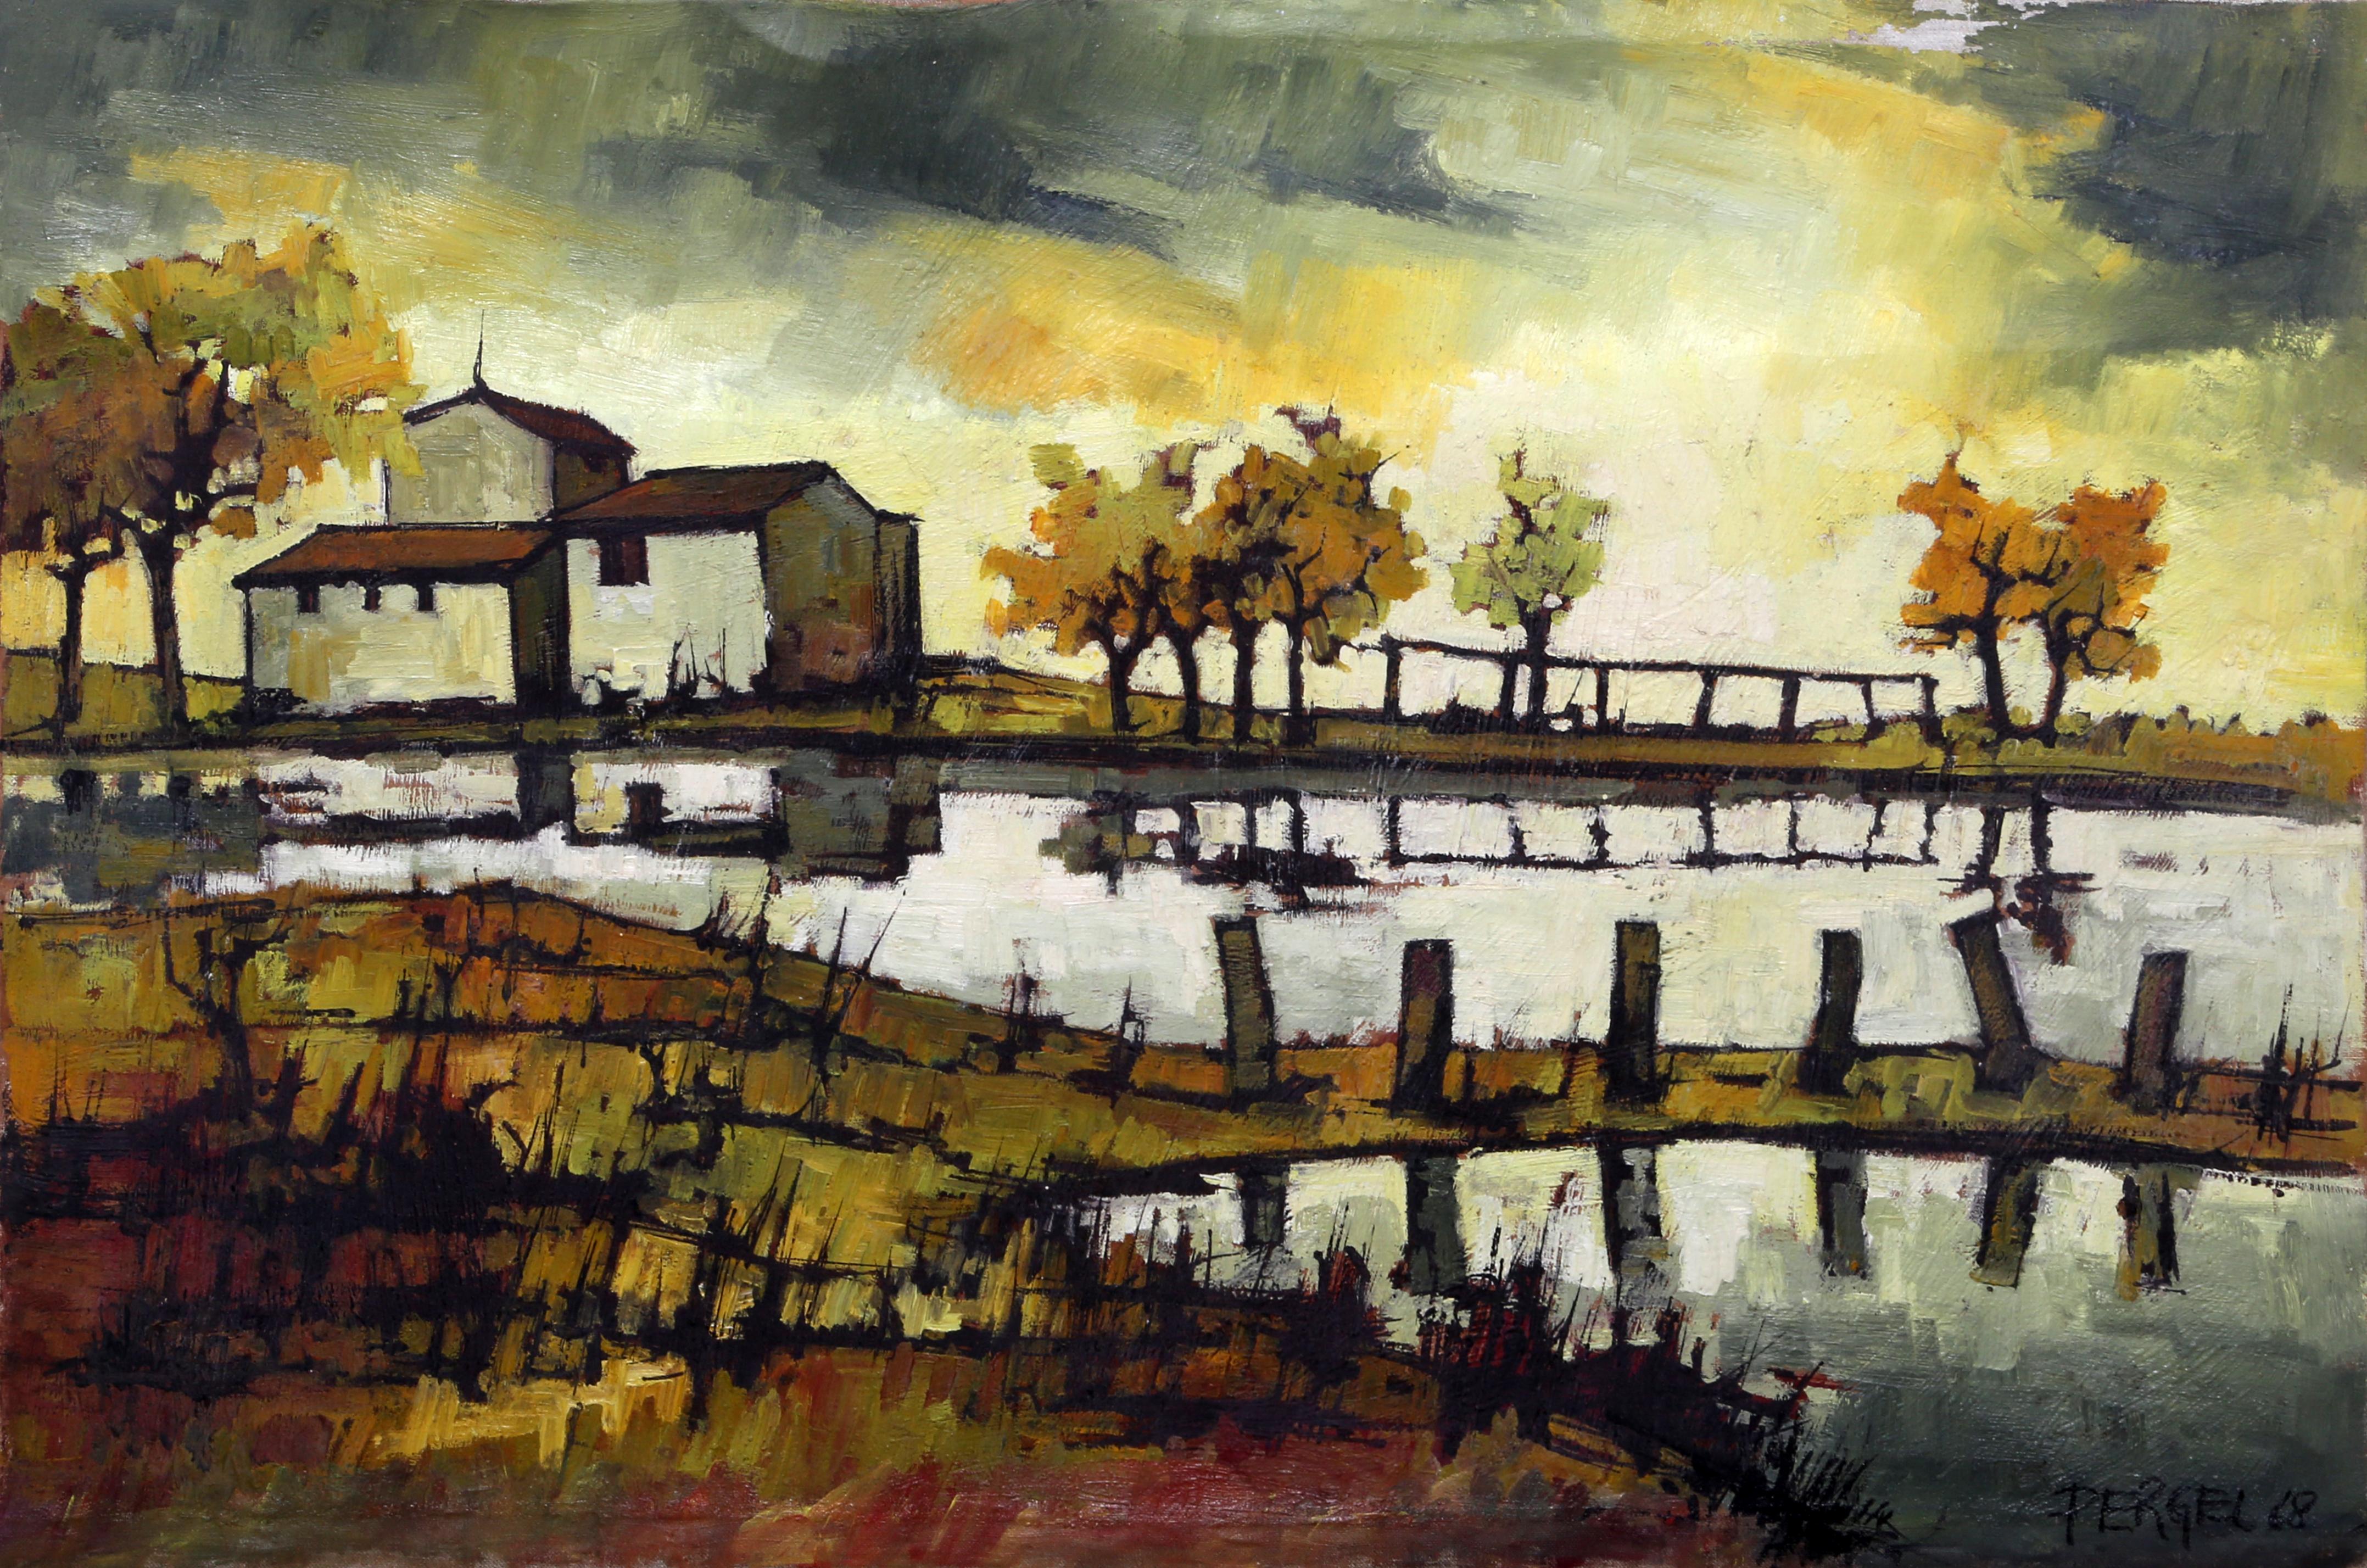 House on the Water, Oil Painting by Jacques Pergel